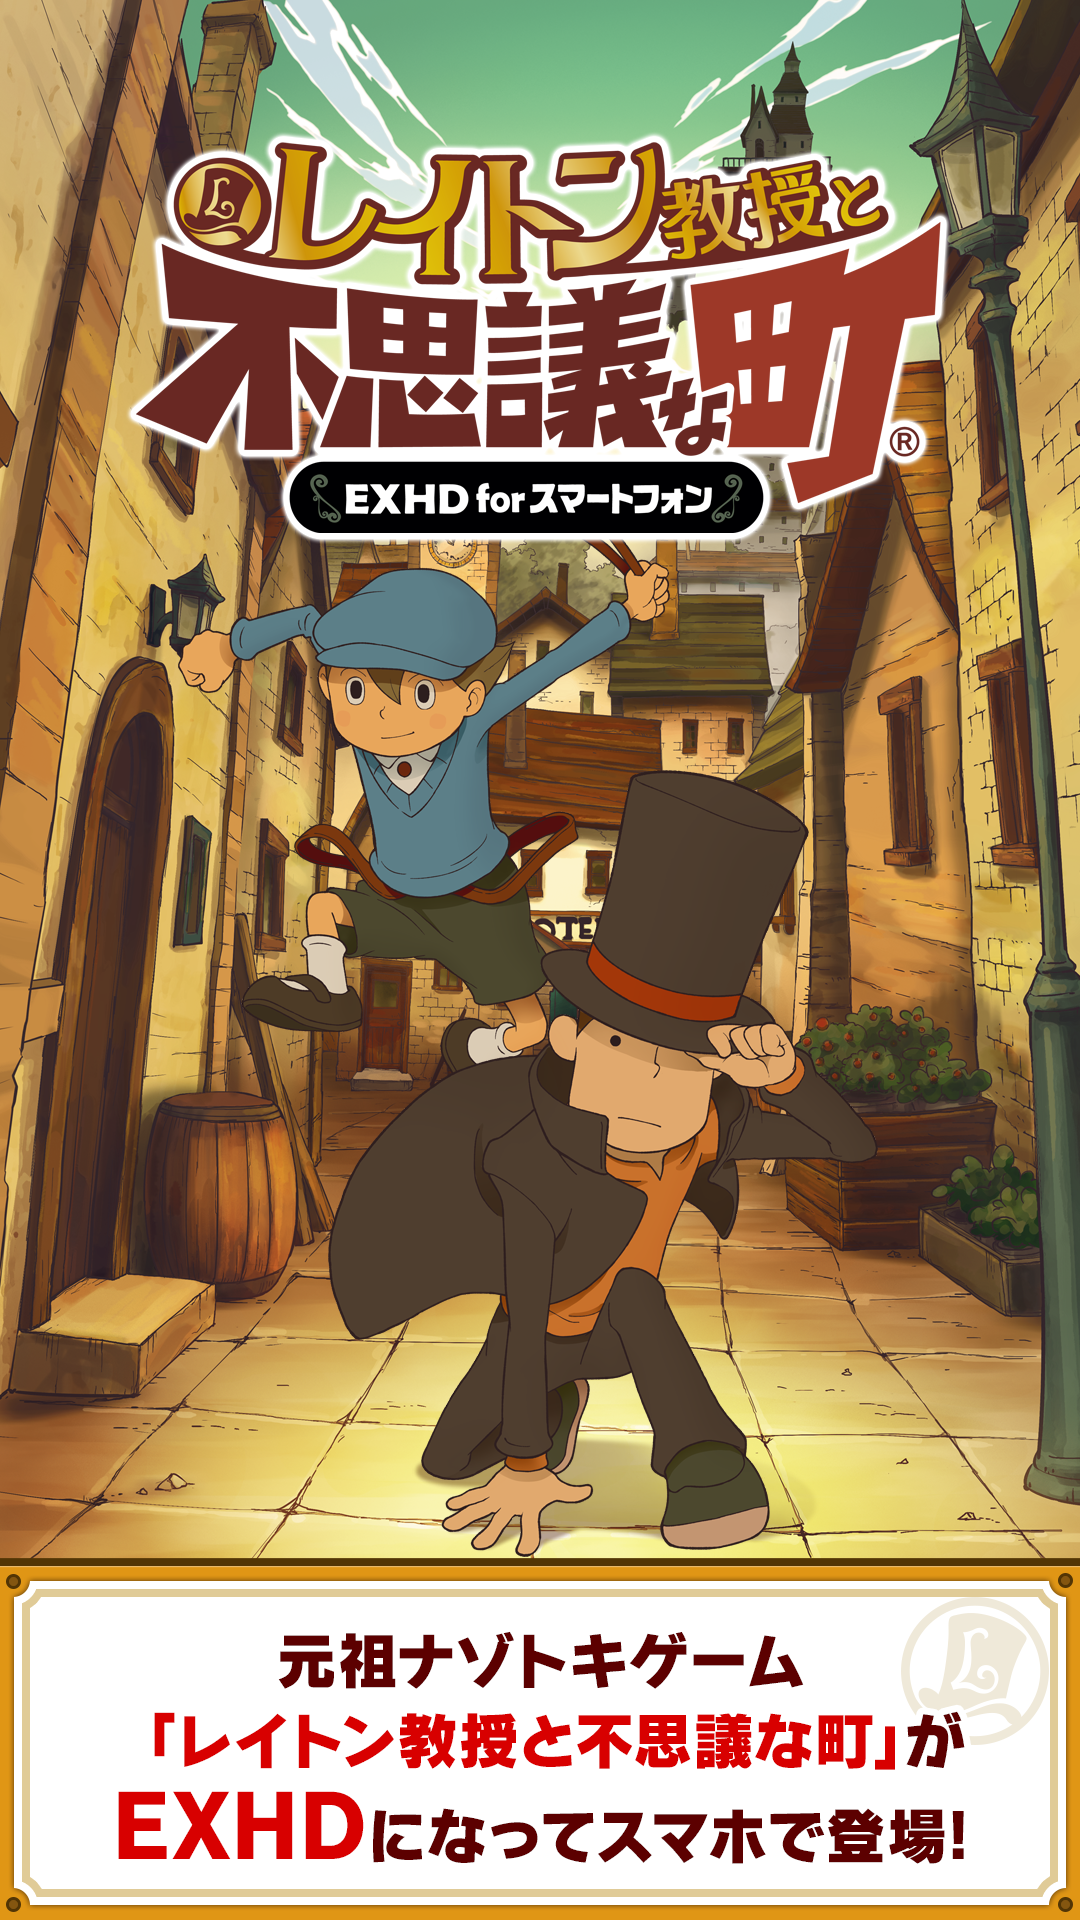 Screenshot 1 of Professor Layton and the Curious Town EXHD for Smartphone 